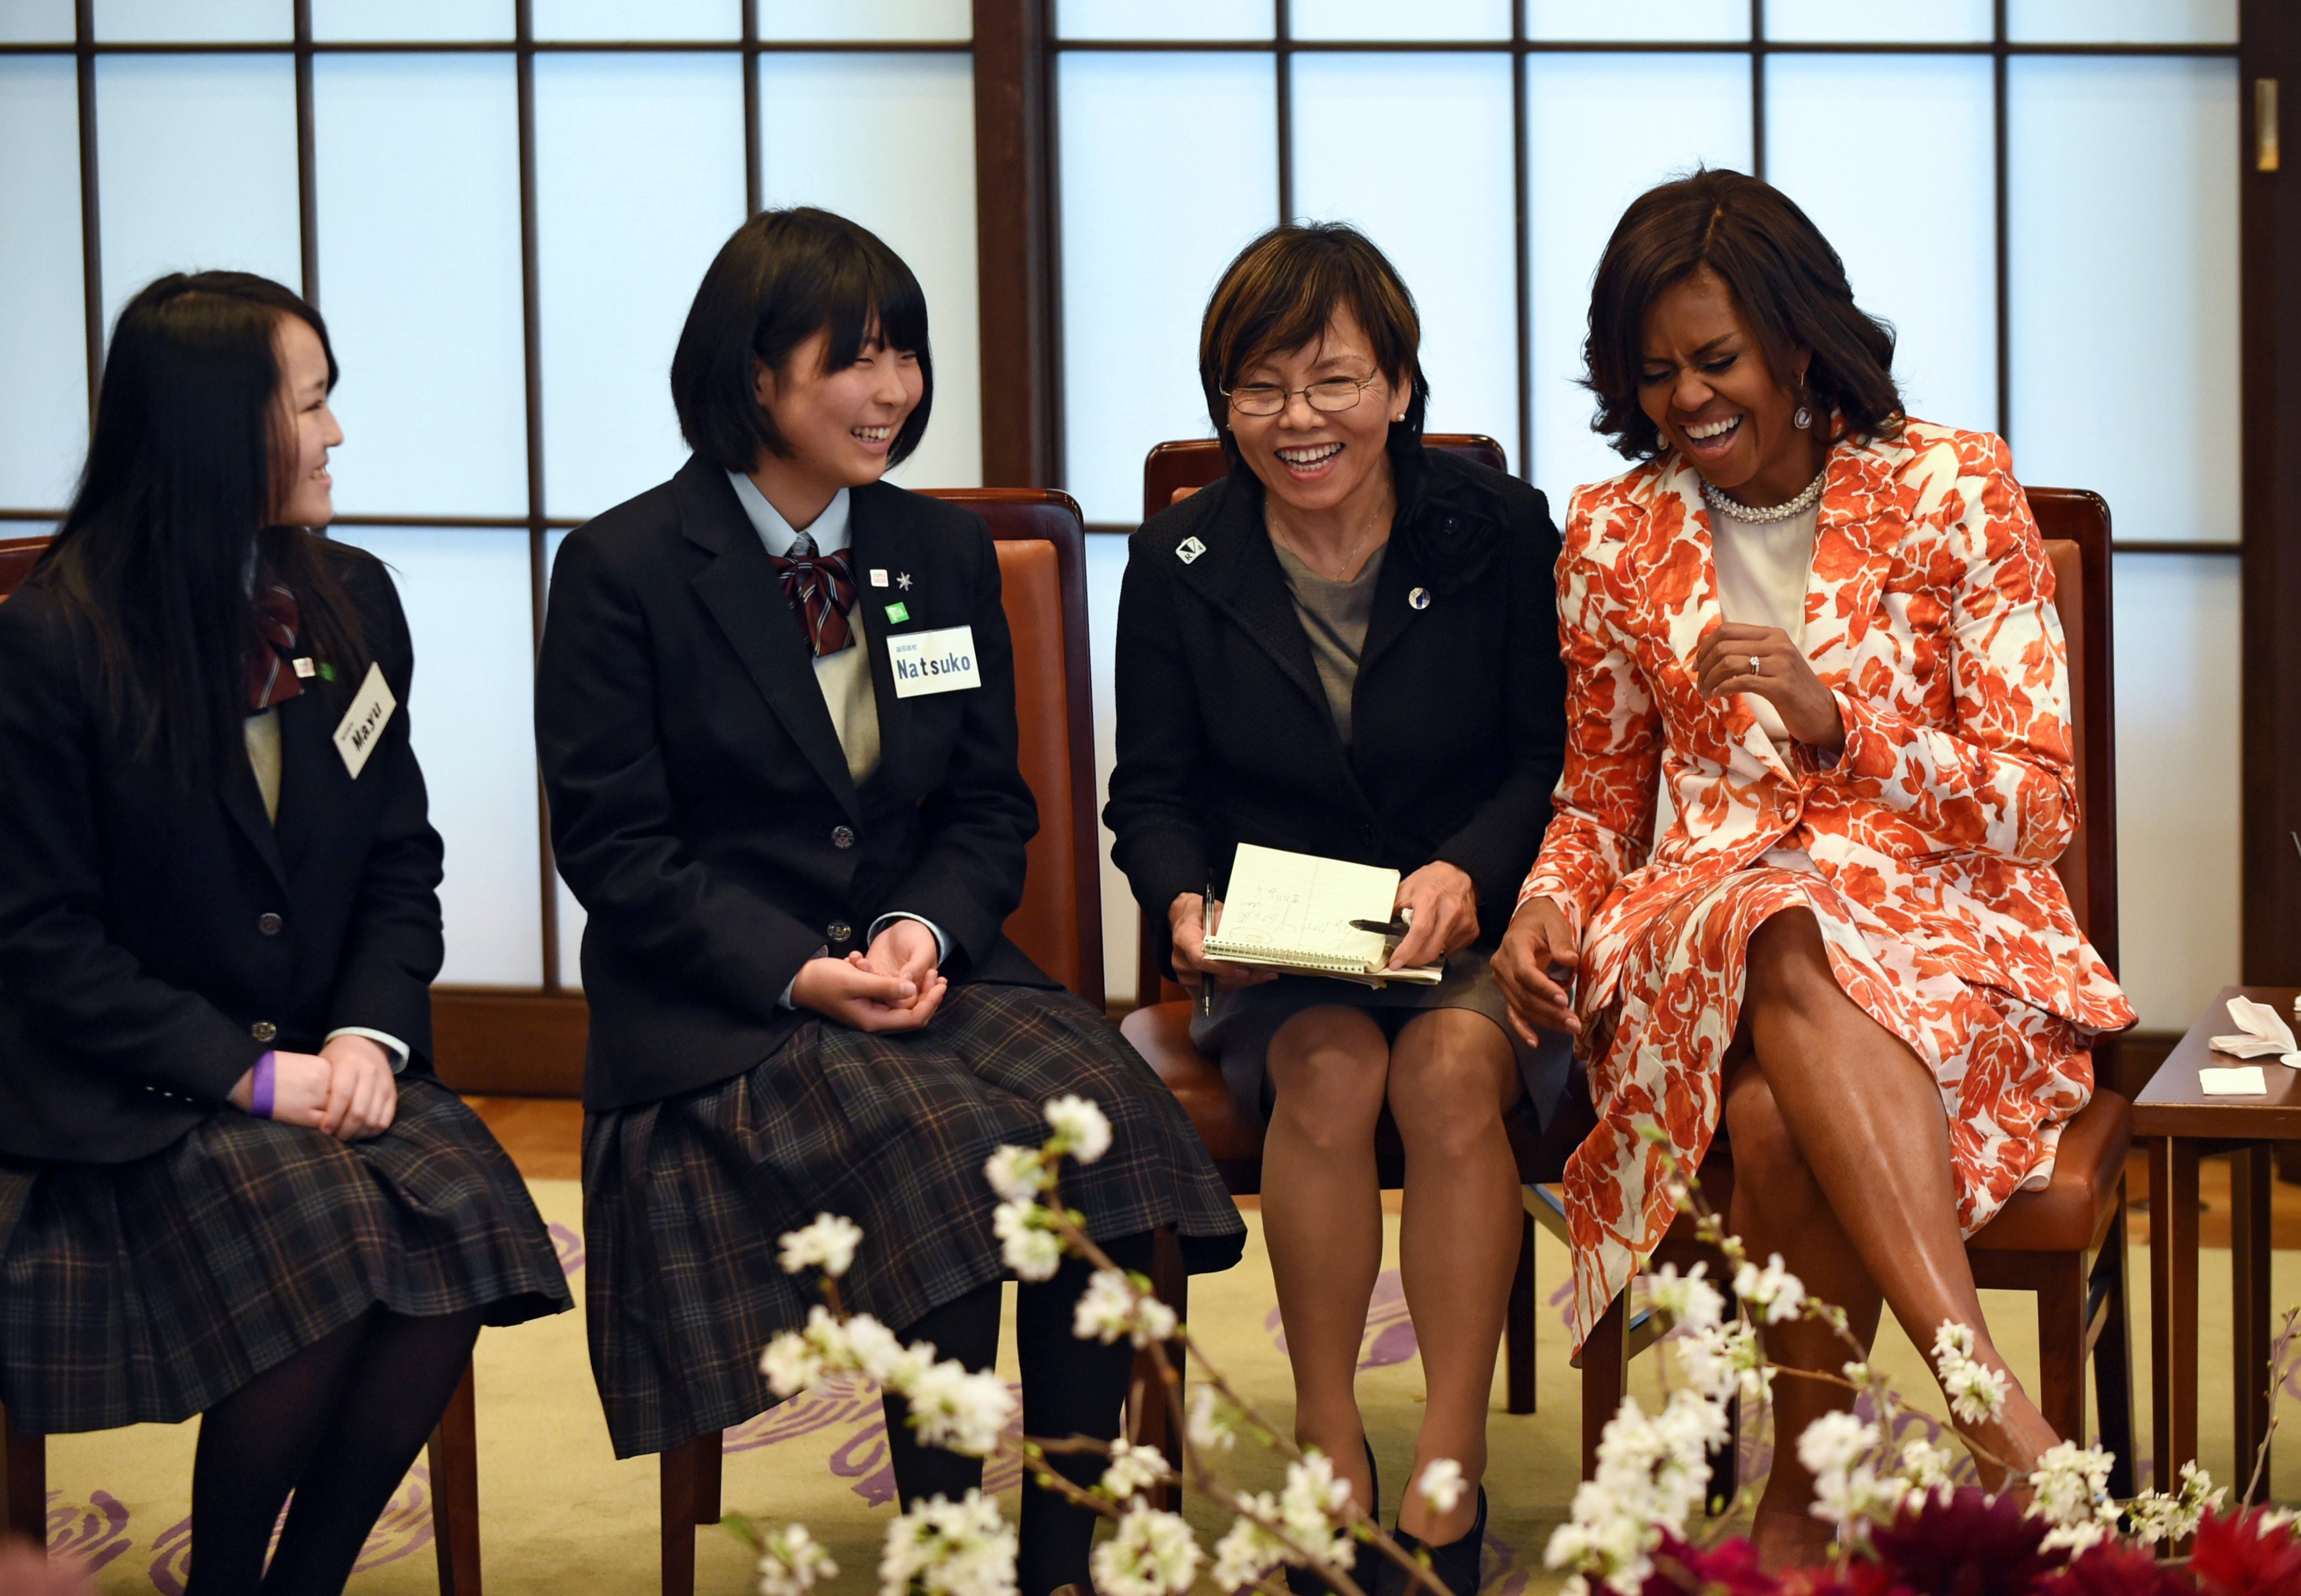 First Lady Michelle Obama shares a laugh with school girls as she attends the Japan-US Joint Girls Education Event at the Iikura Guest House in Tokyo on March 19, 2015.